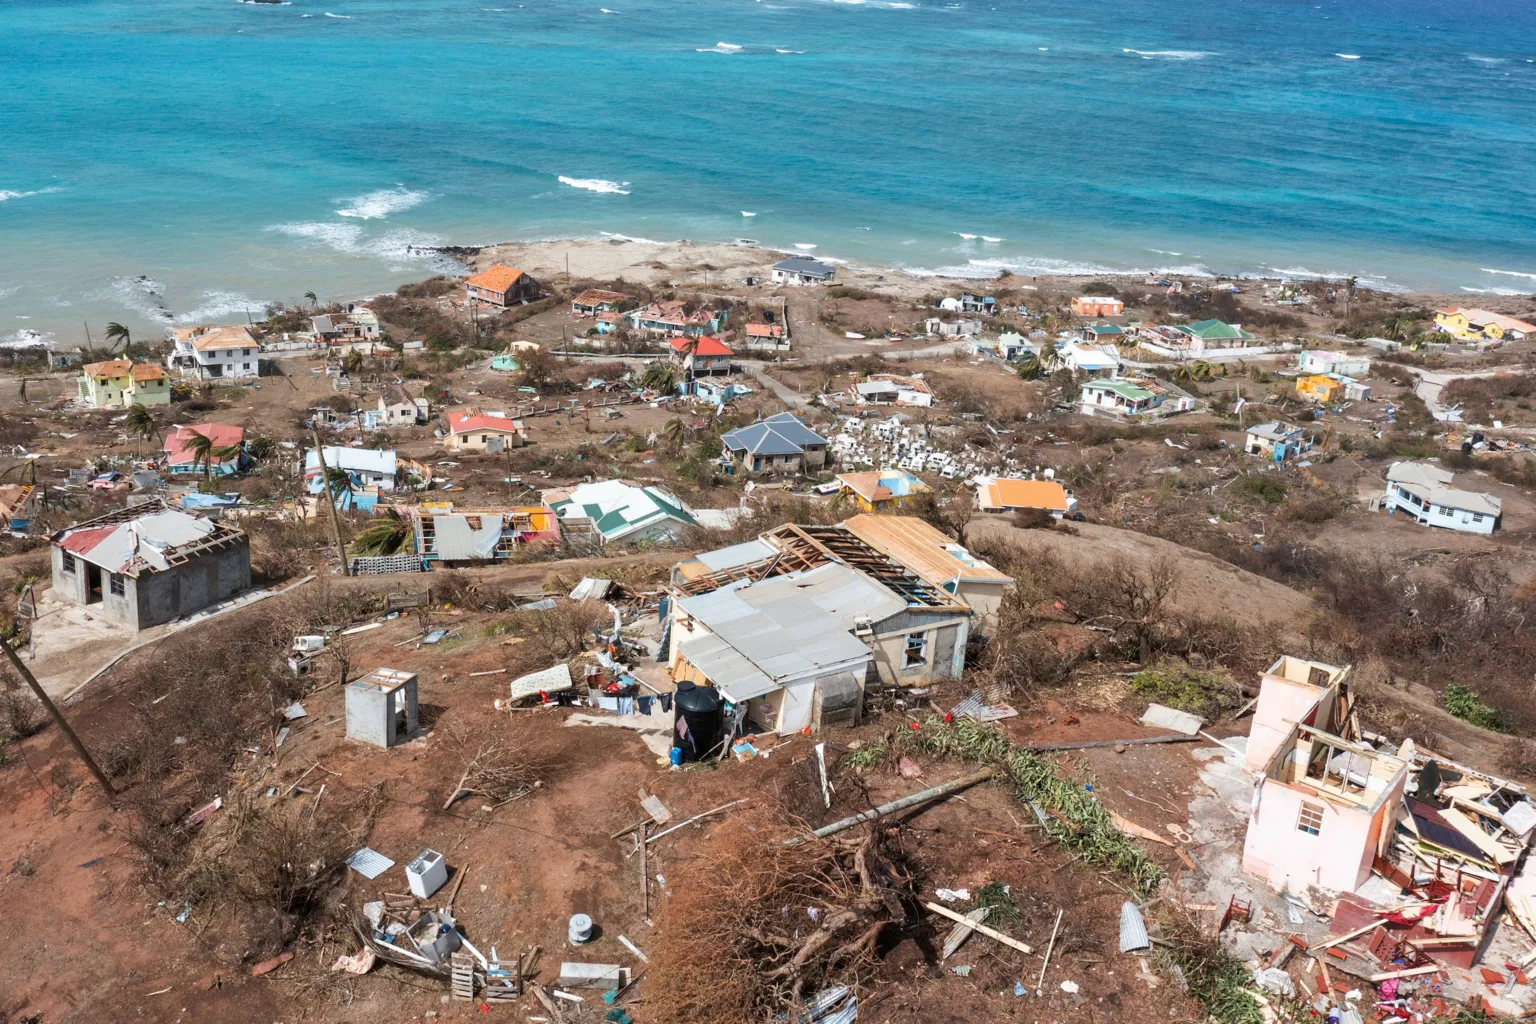 Drone footage showed the scale of the damage on Petite Martinique, Grenada after Hurricane Beryl, where homes were left without roofs and windows. Photo: BBC